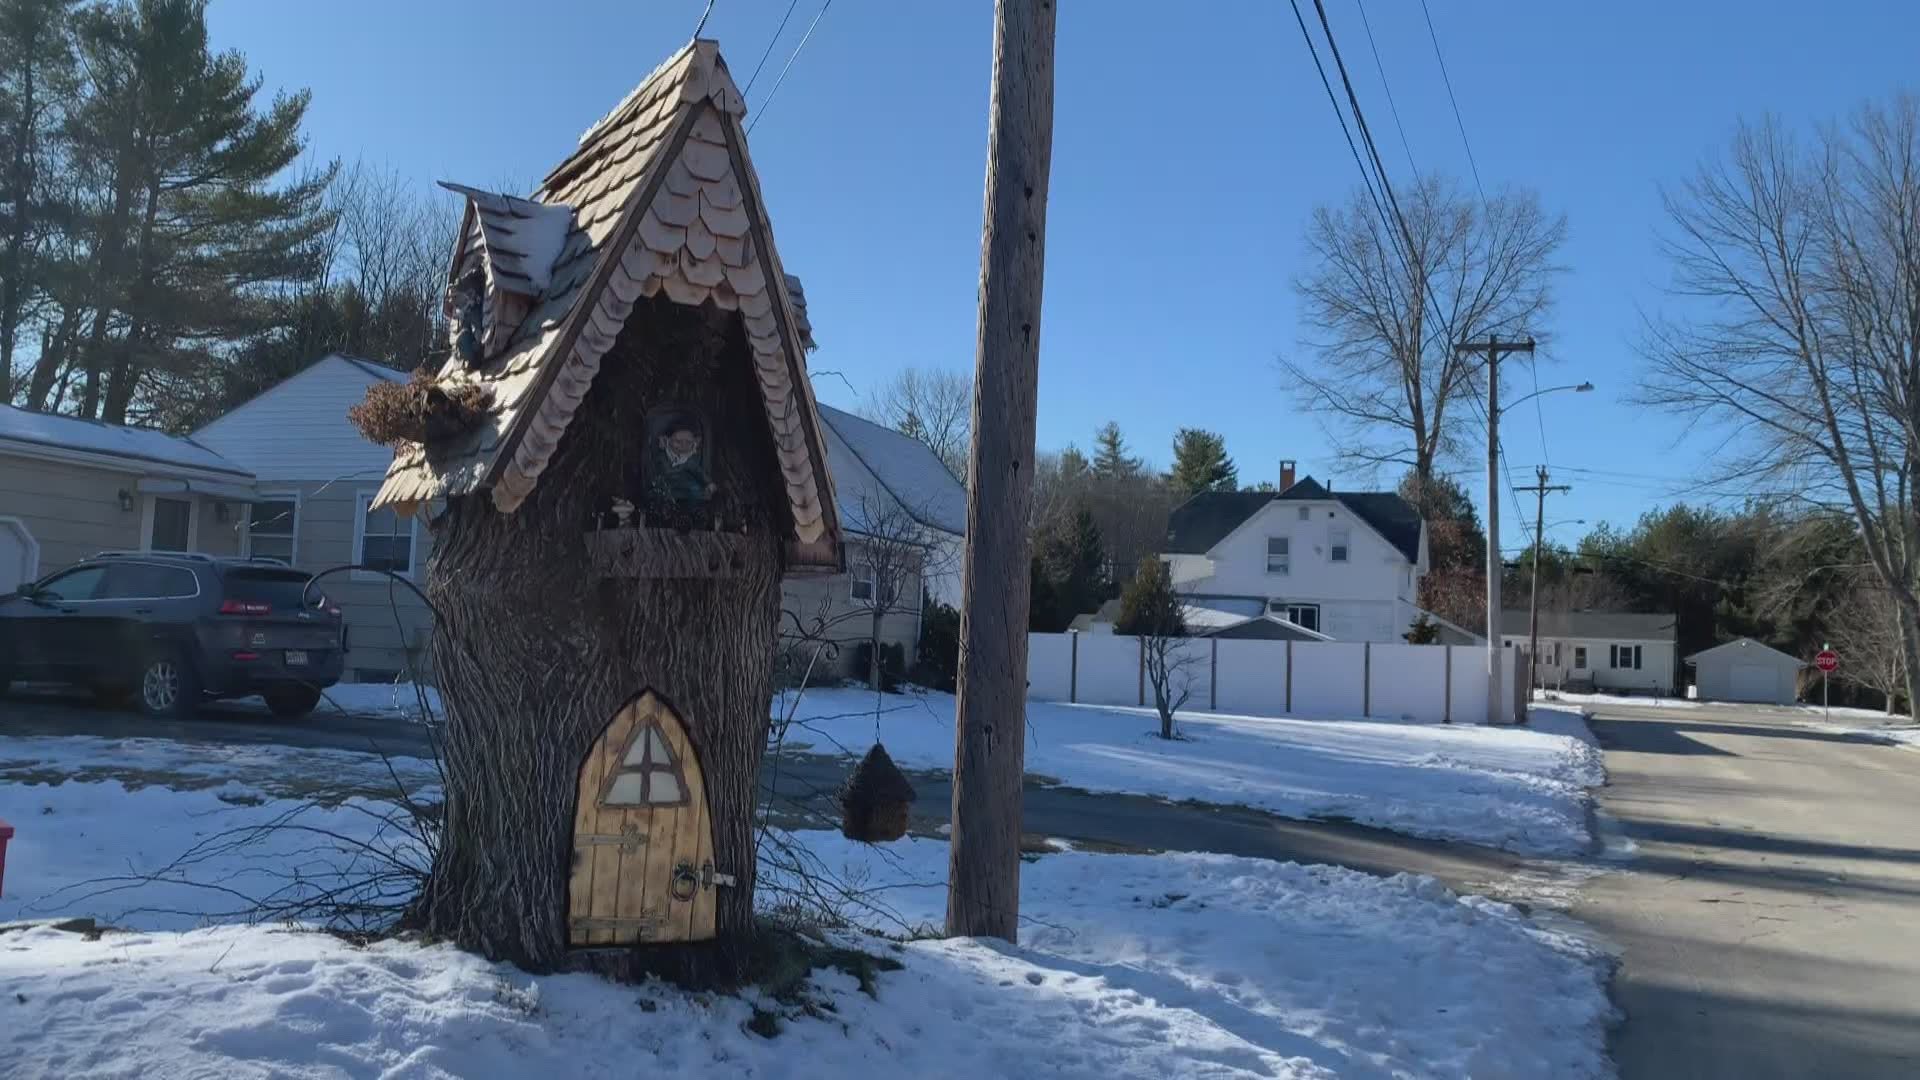 Laurie Basinet took down her front tree this summer and decided to turn the trunk into a fairy house. It's bringing together community, even from a distance.